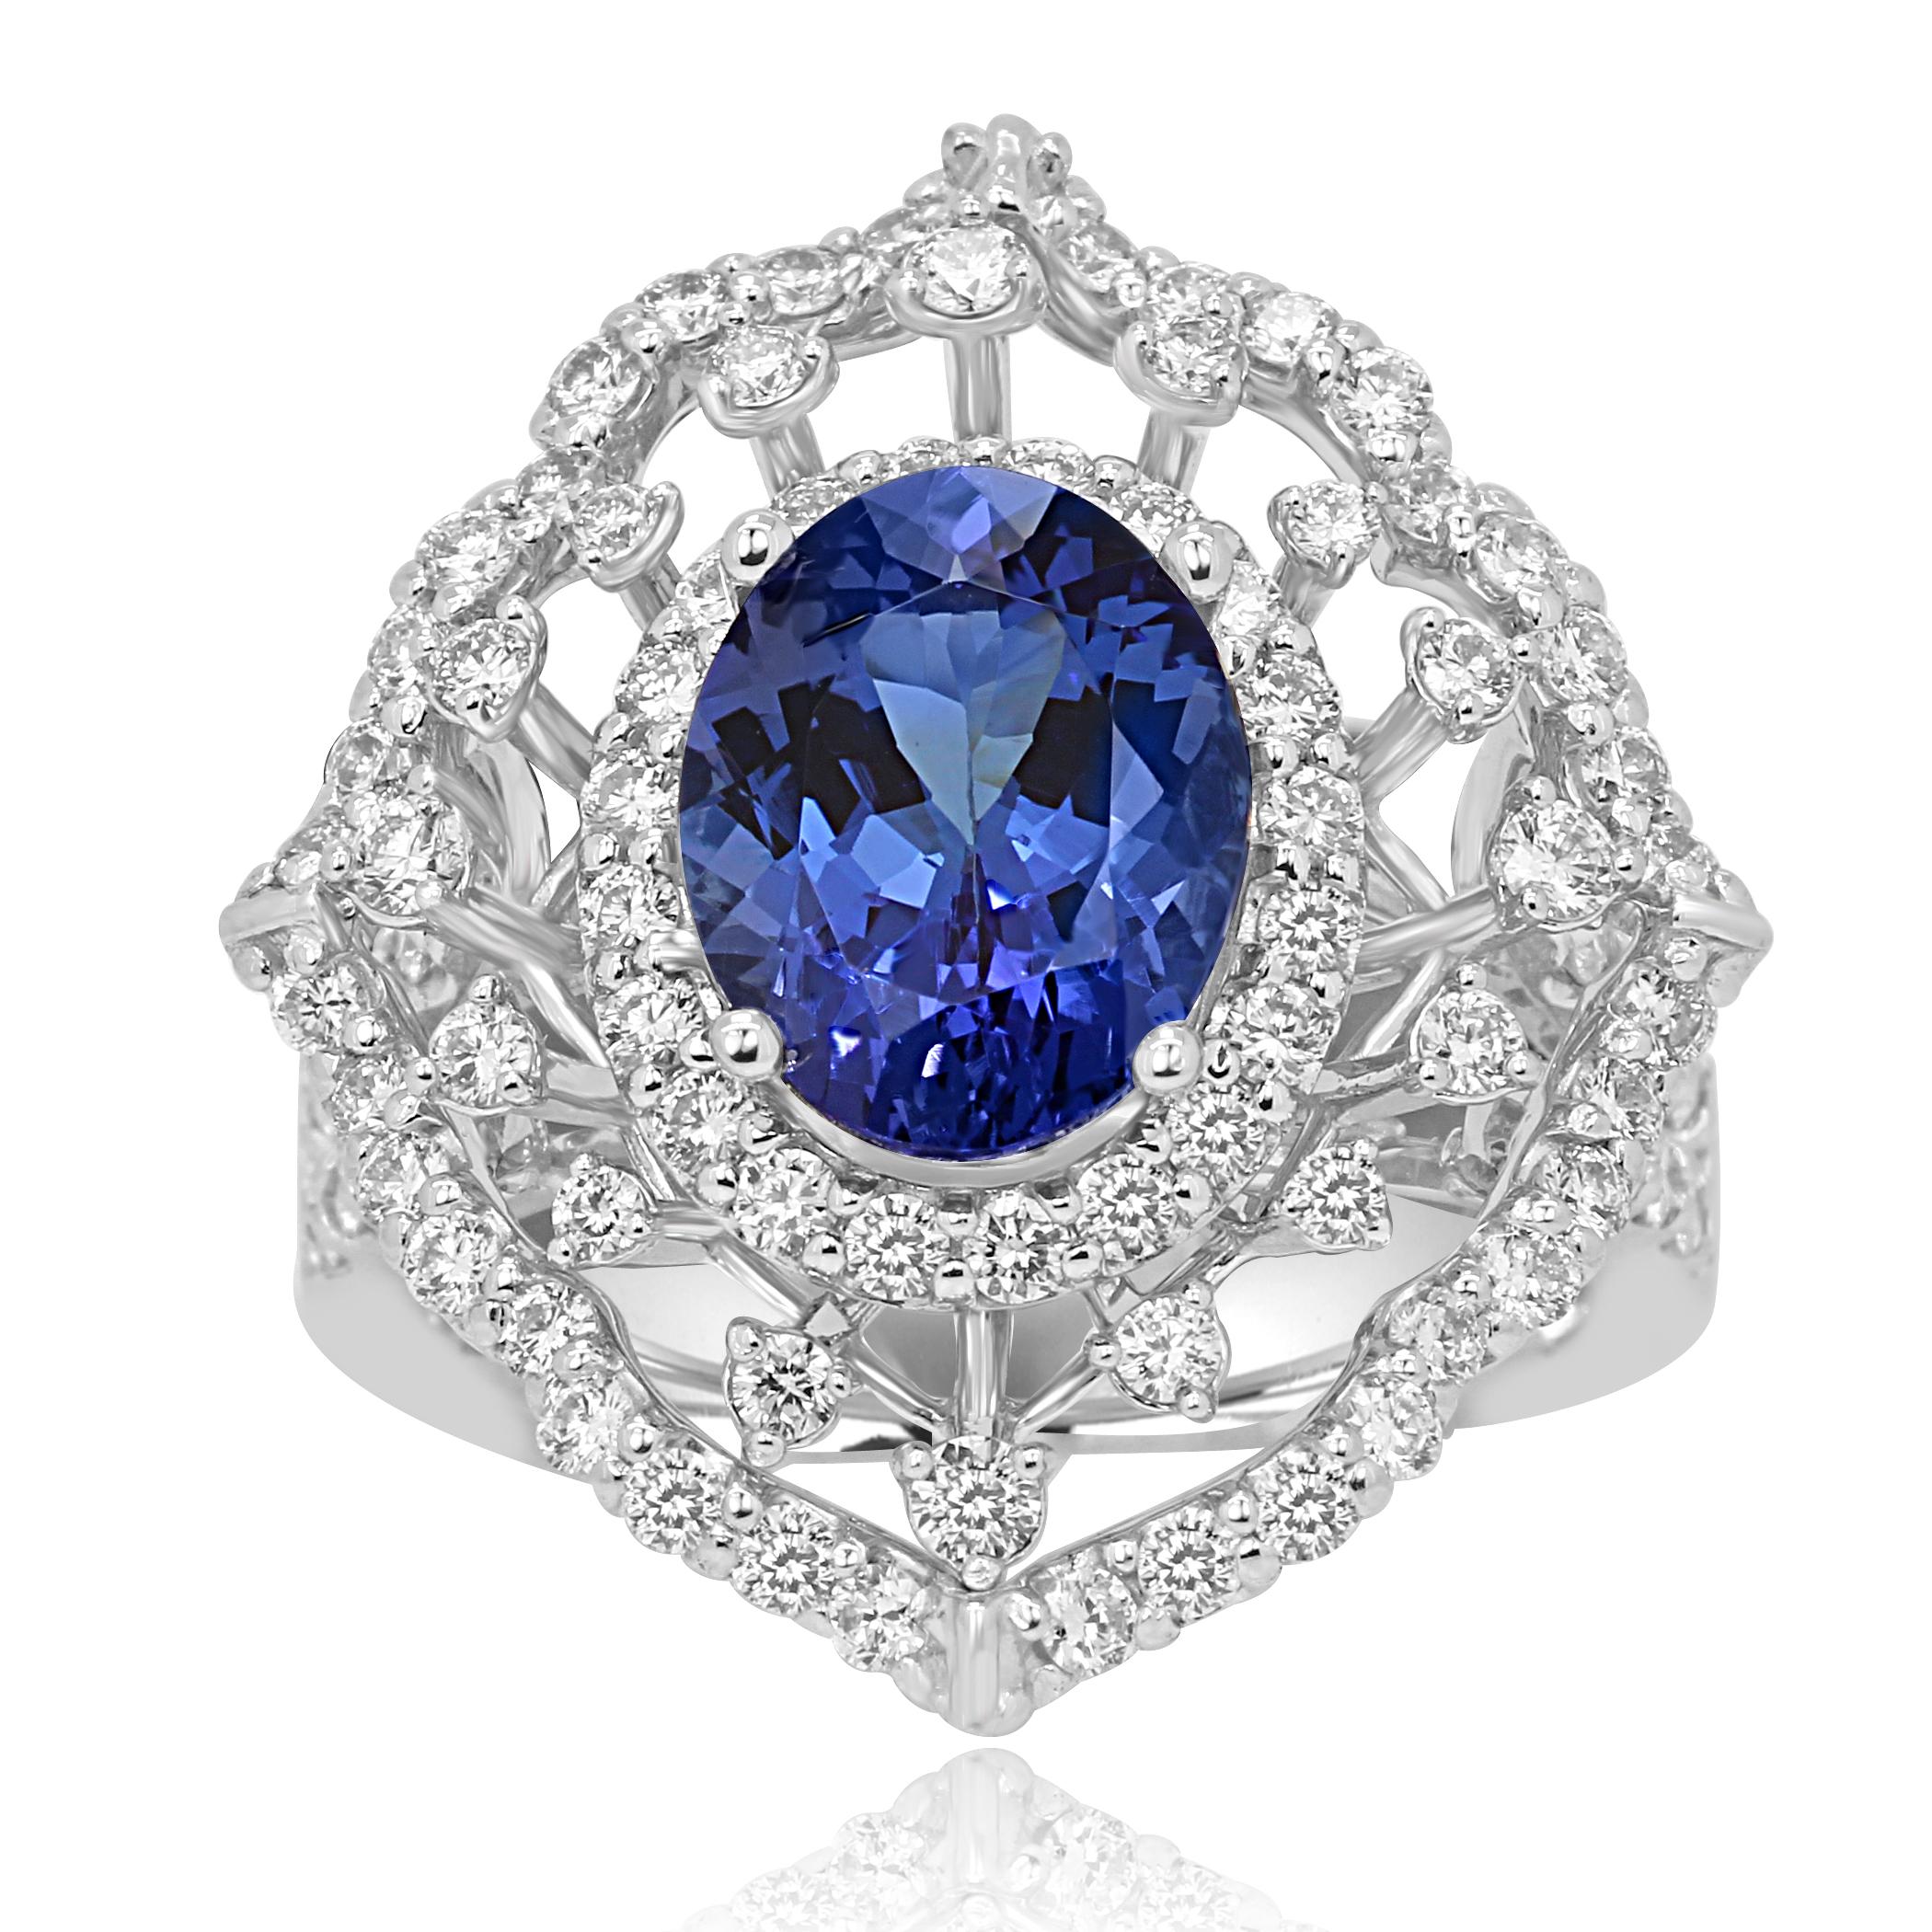 Tanzanite Cushion 2.75 Carat  encircled in a Triple Halo of White Round Diamonds 1.19 Carat in a Stunning 14K White Gold Cocktail Fashion Ring with nice wire work gallery ans split shank .

Style available in different price ranges. Prices are based